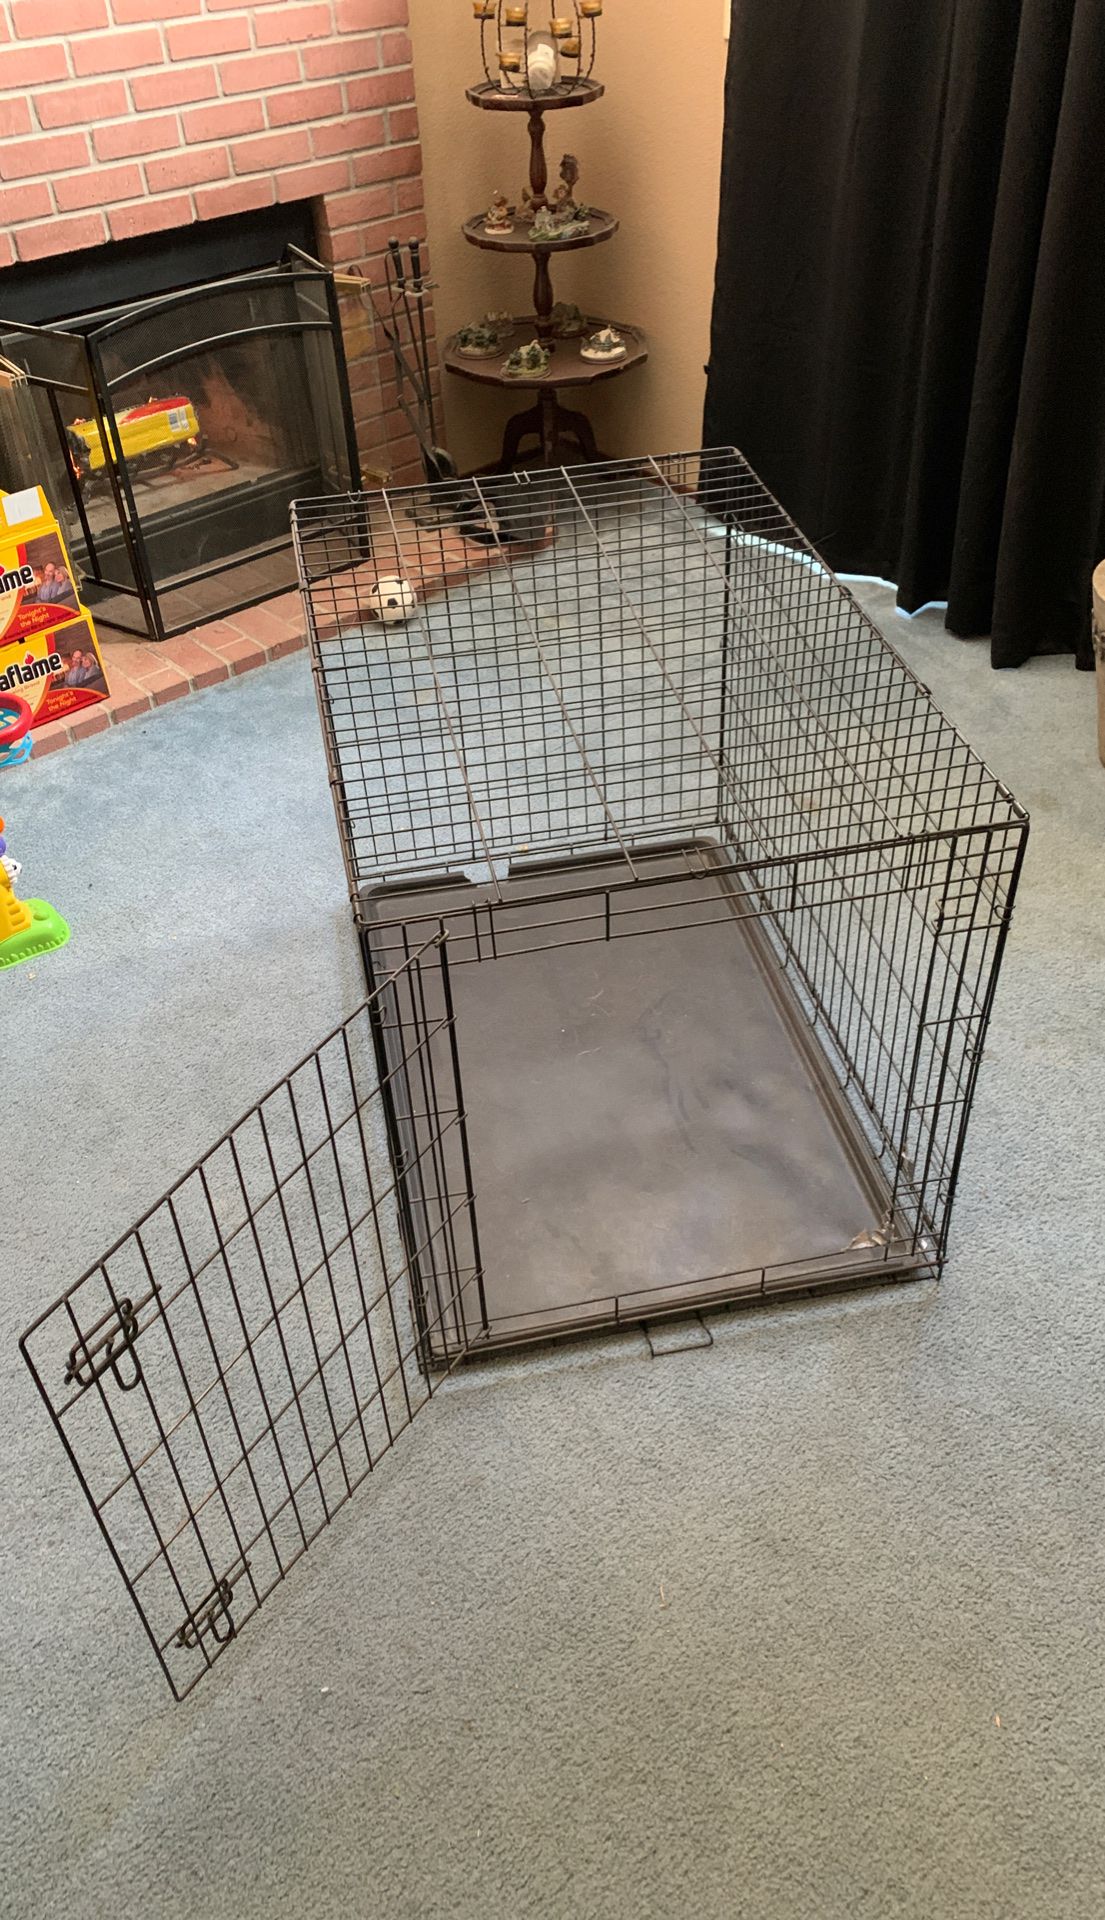 Large dog crate / kennel